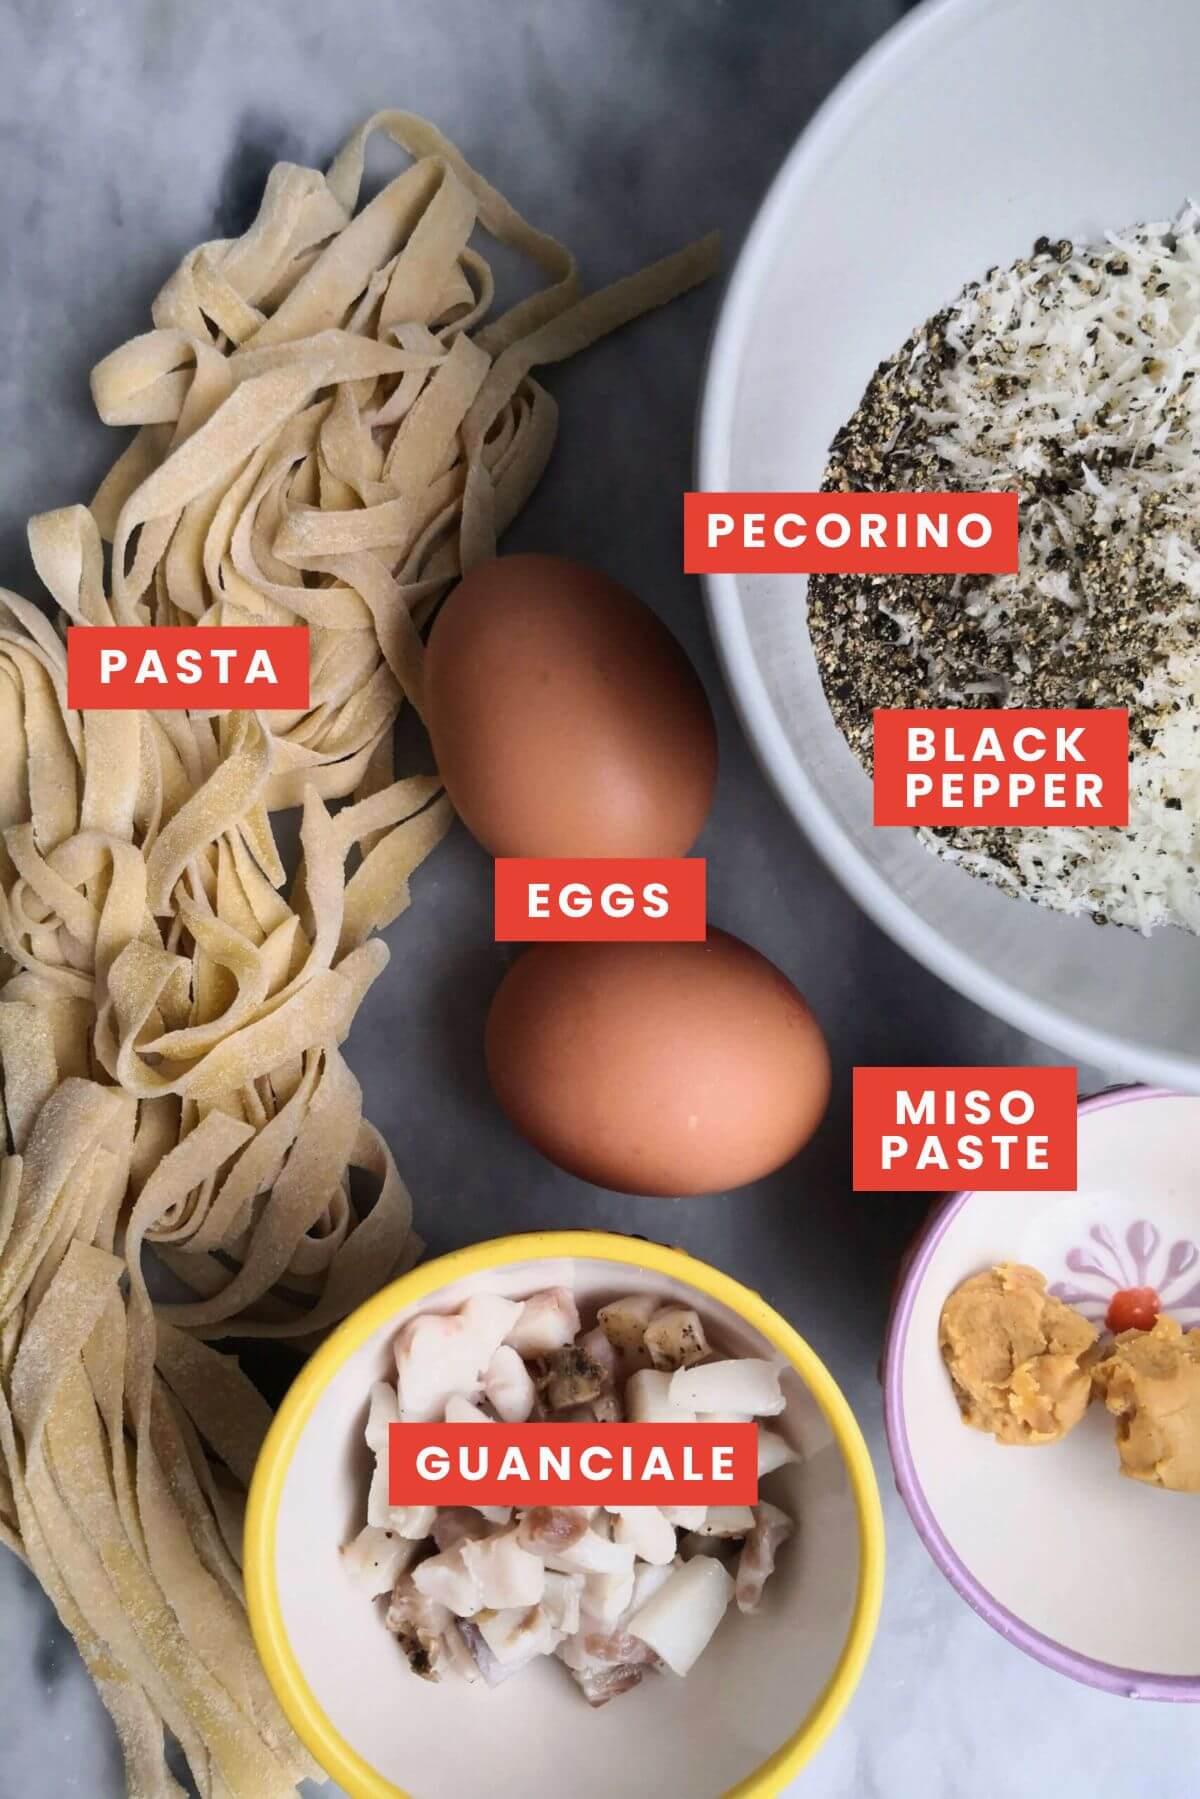 Ingredients for miso carbonara laid out on a grey marble board - fettuccine, eggs, pecorino romano, black pepper, guanciale and miso paste.